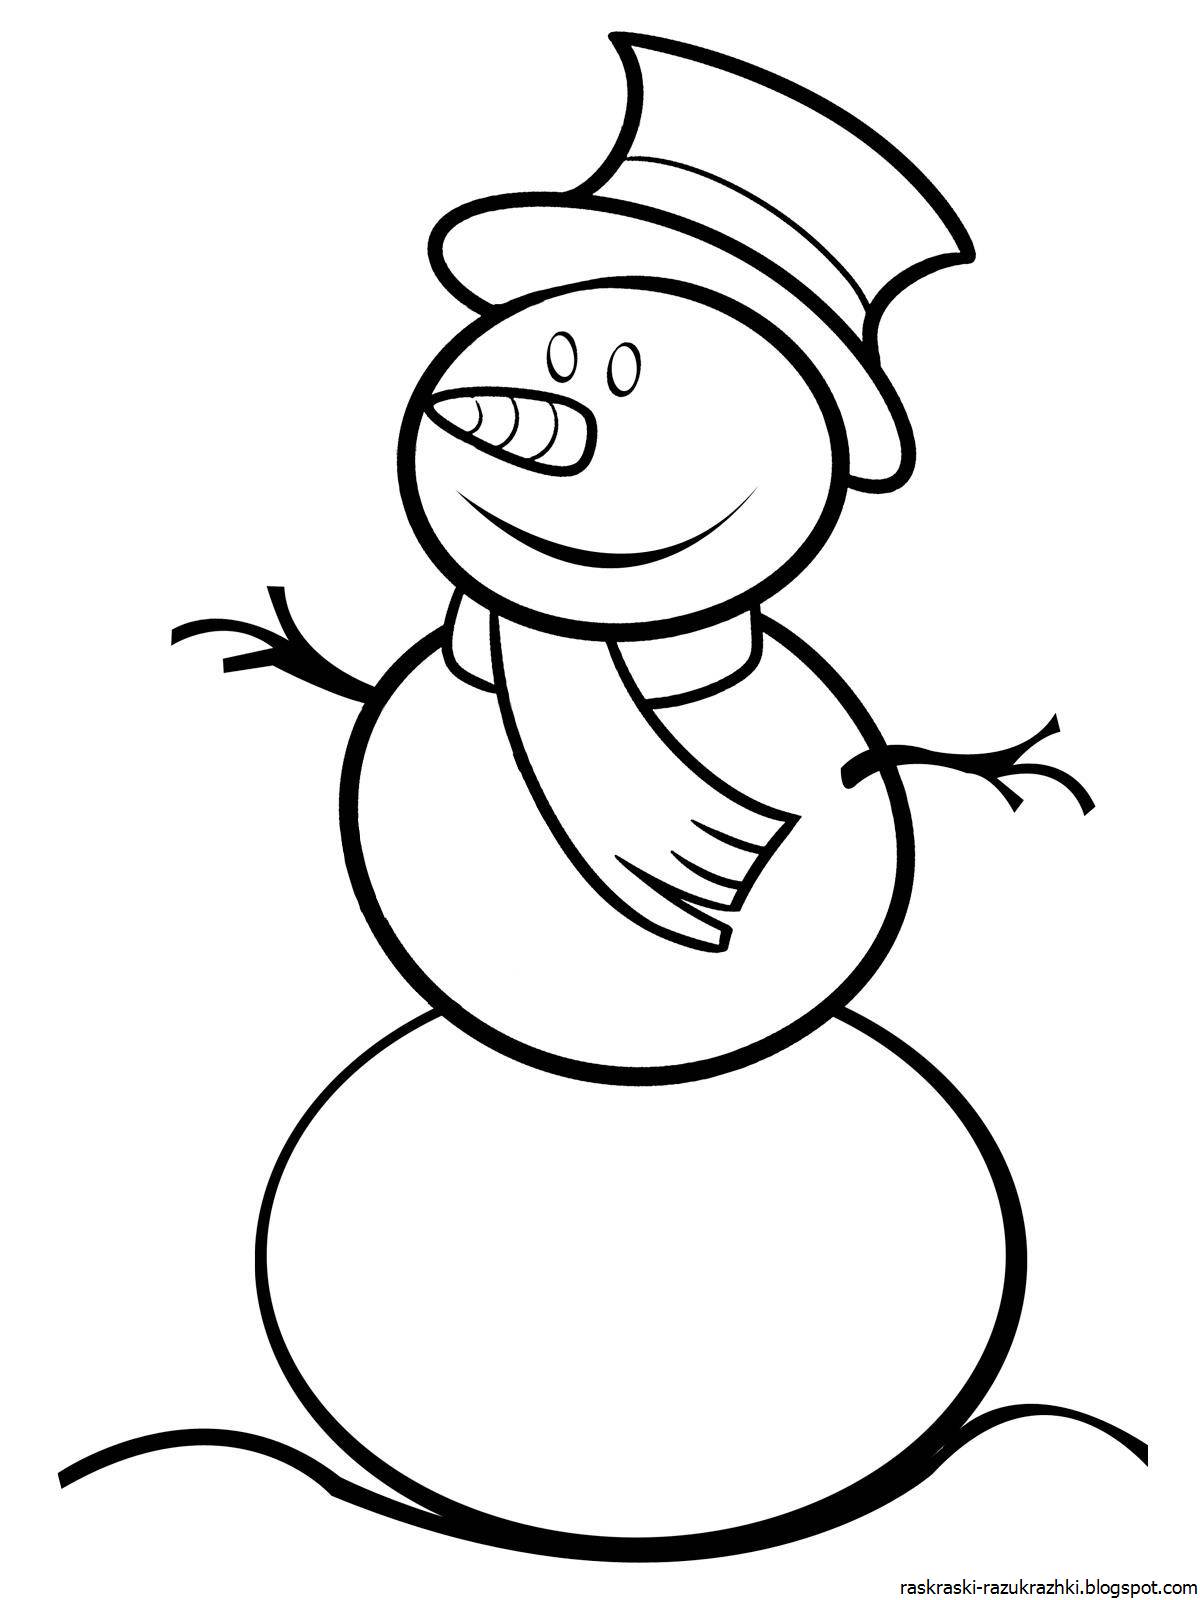 Glamourous snowman coloring book for kids